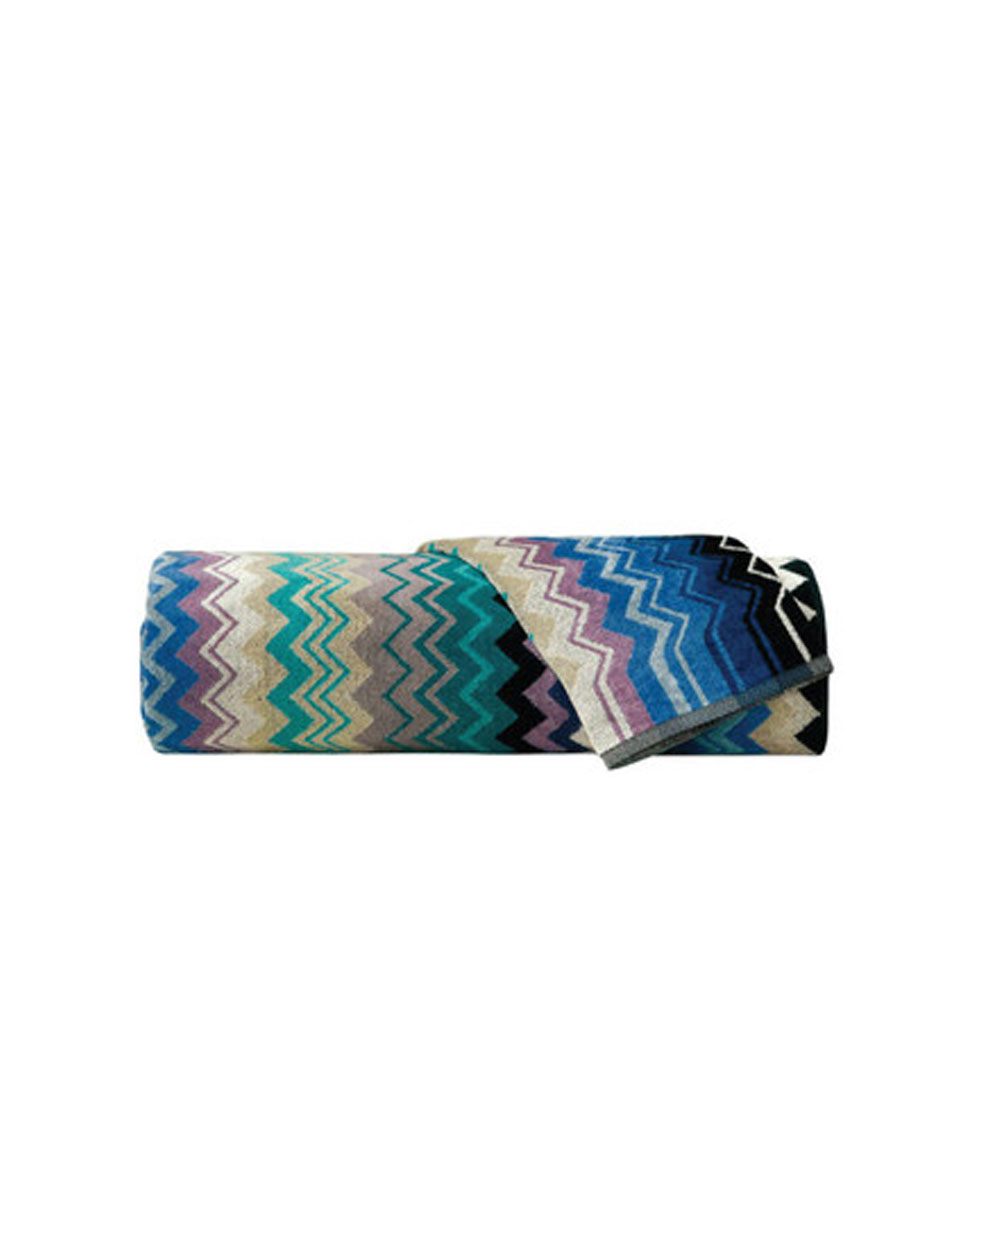 Missoni towel from Sisters & Co, $325